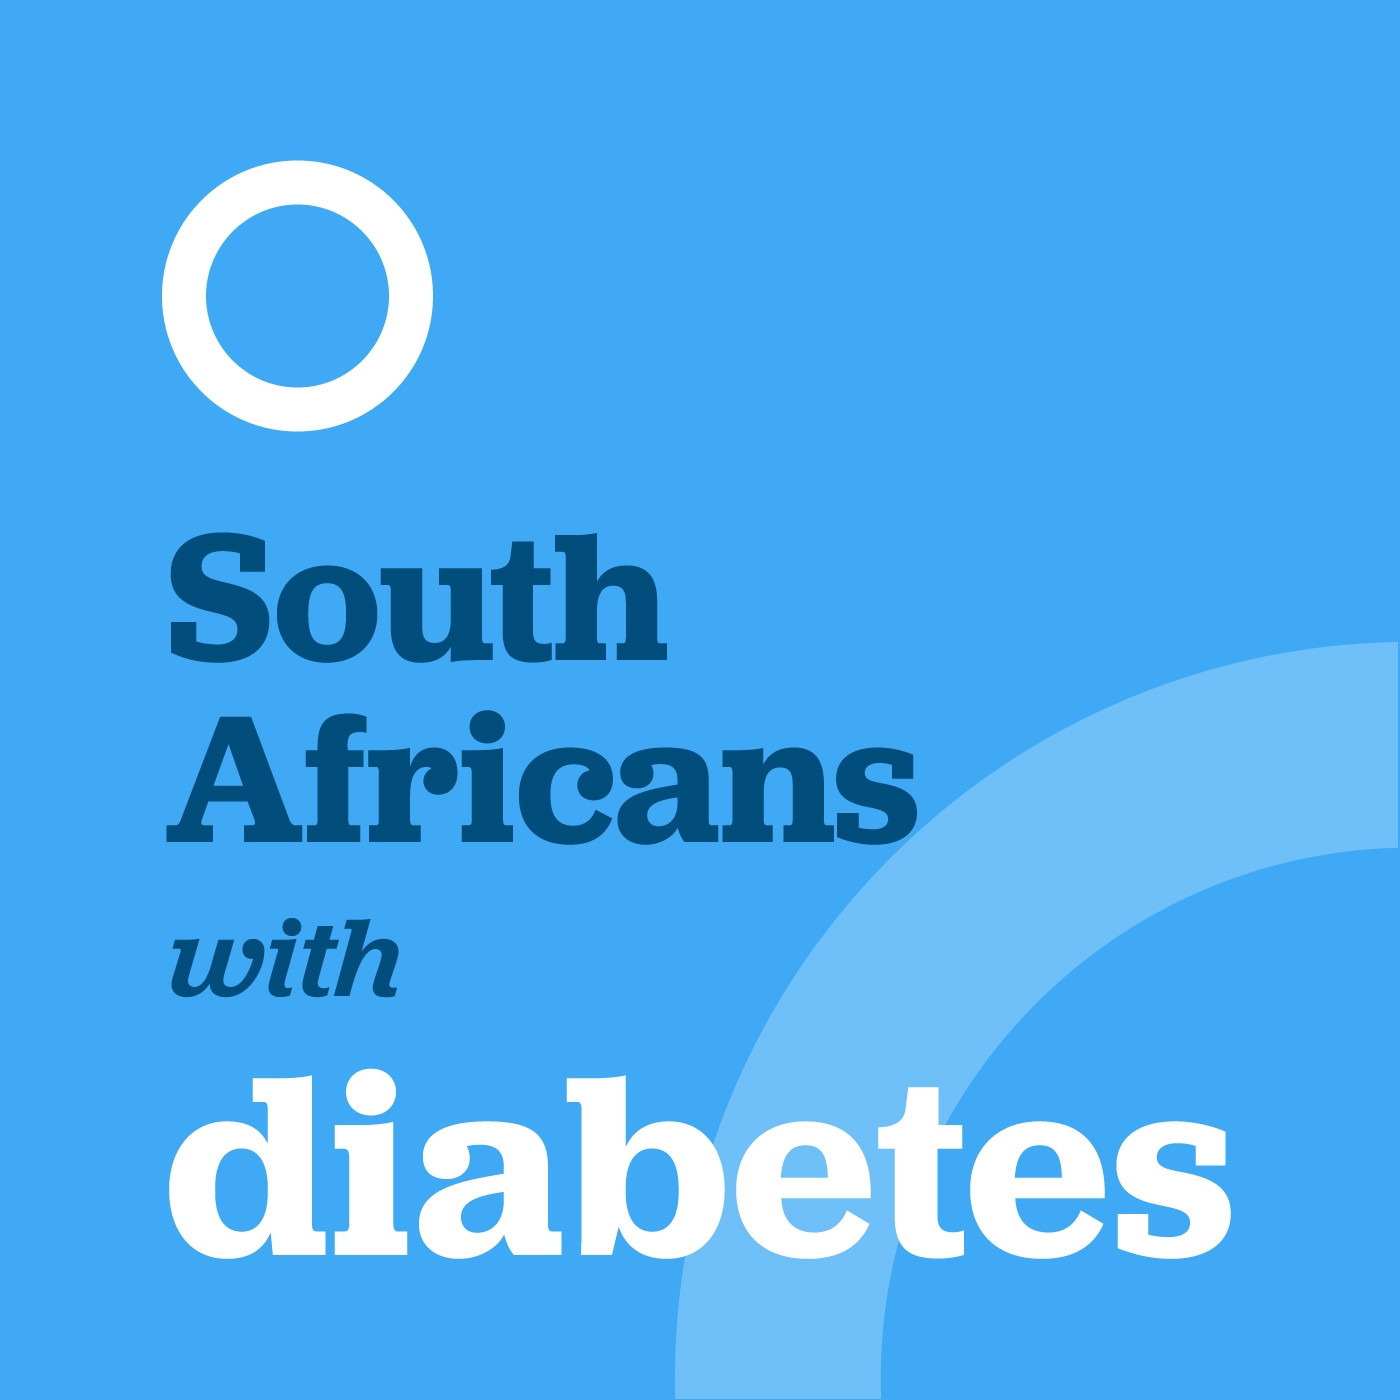 Welcome to Season 2 of South Africans with Diabetes